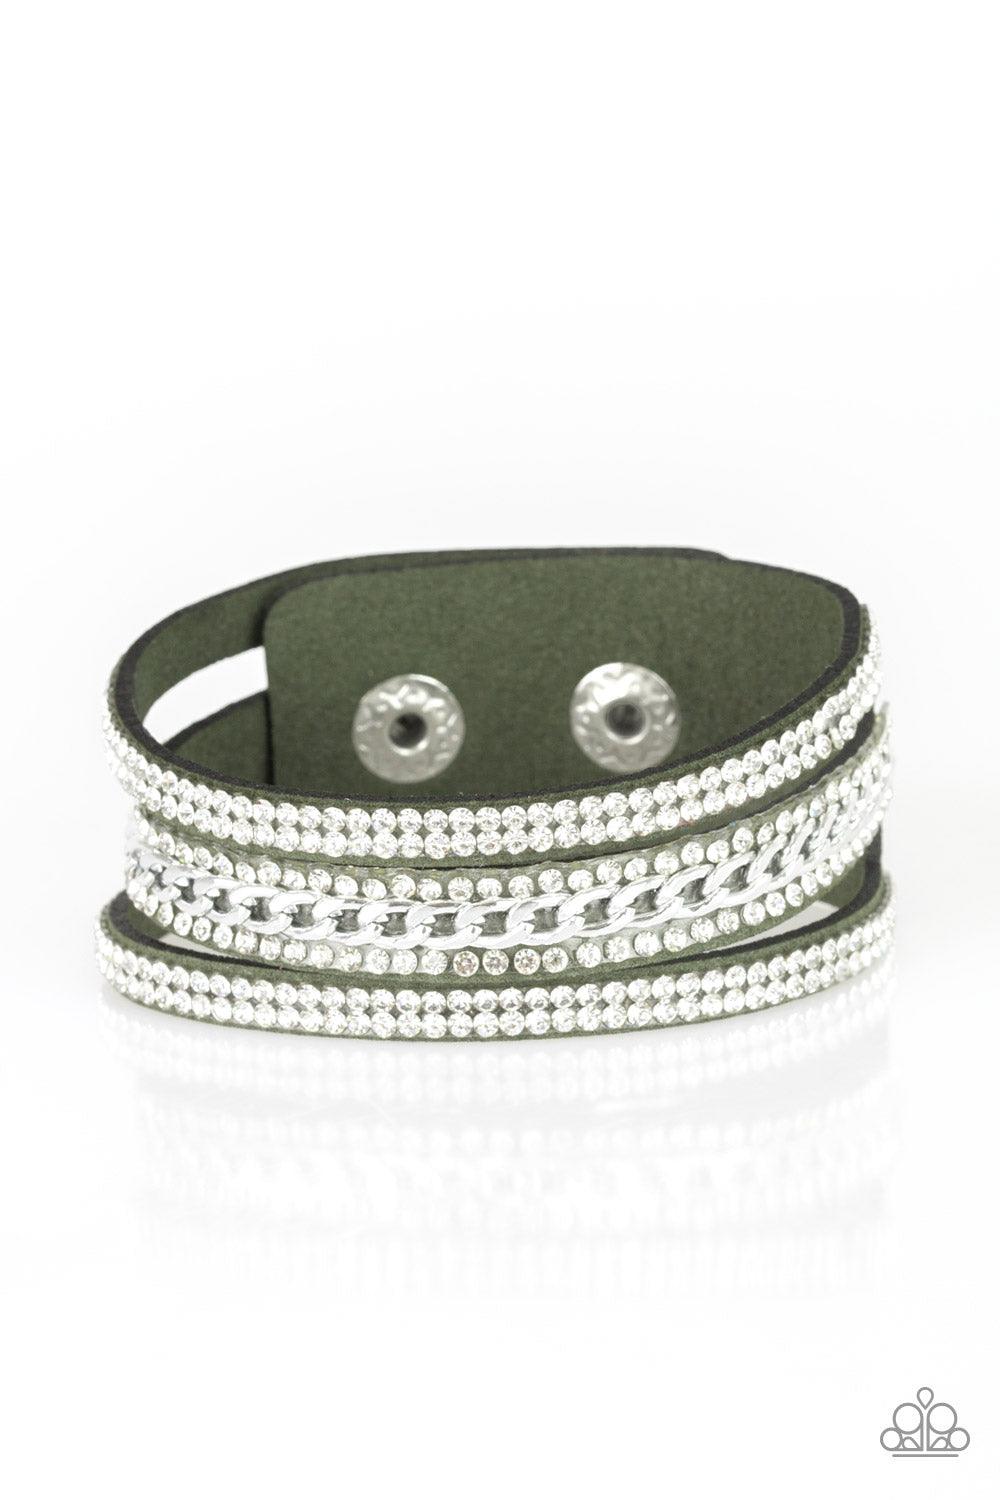 Paparazzi Accessories Rollin In Rhinestones - Green Rows of glassy white rhinestones and a shimmery silver chain are encrusted along green suede bands for a sassy look. Features an adjustable snap closure. Sold as one individual bracelet. Jewelry